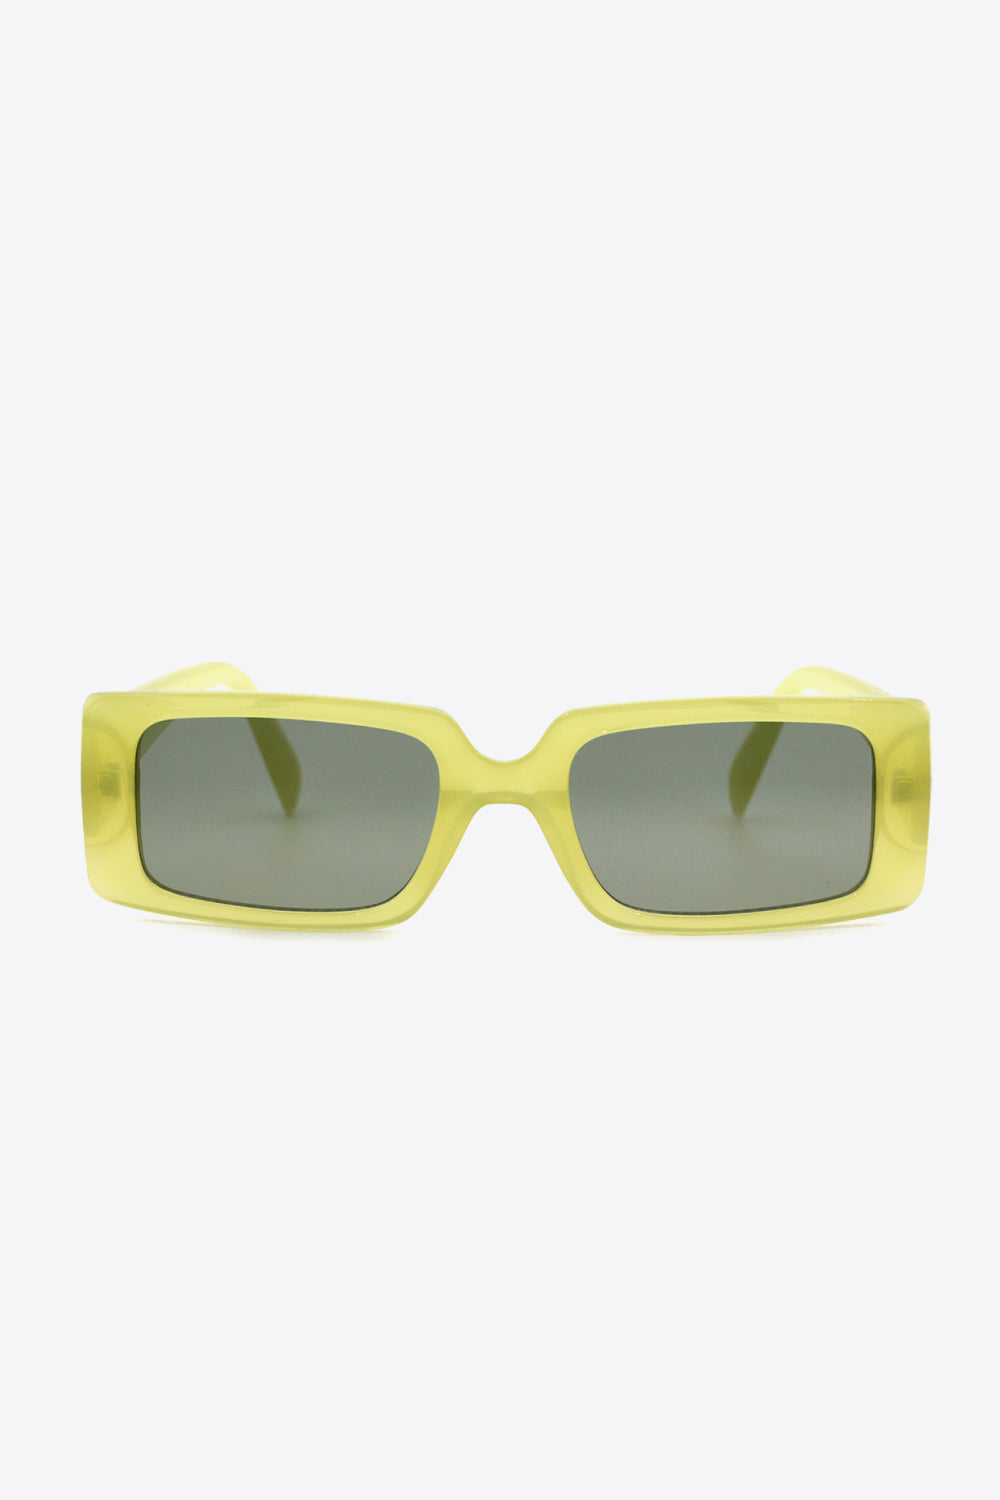 UV400 Polycarbonate Rectangle Sunglasses Print on any thing USA/STOD clothes